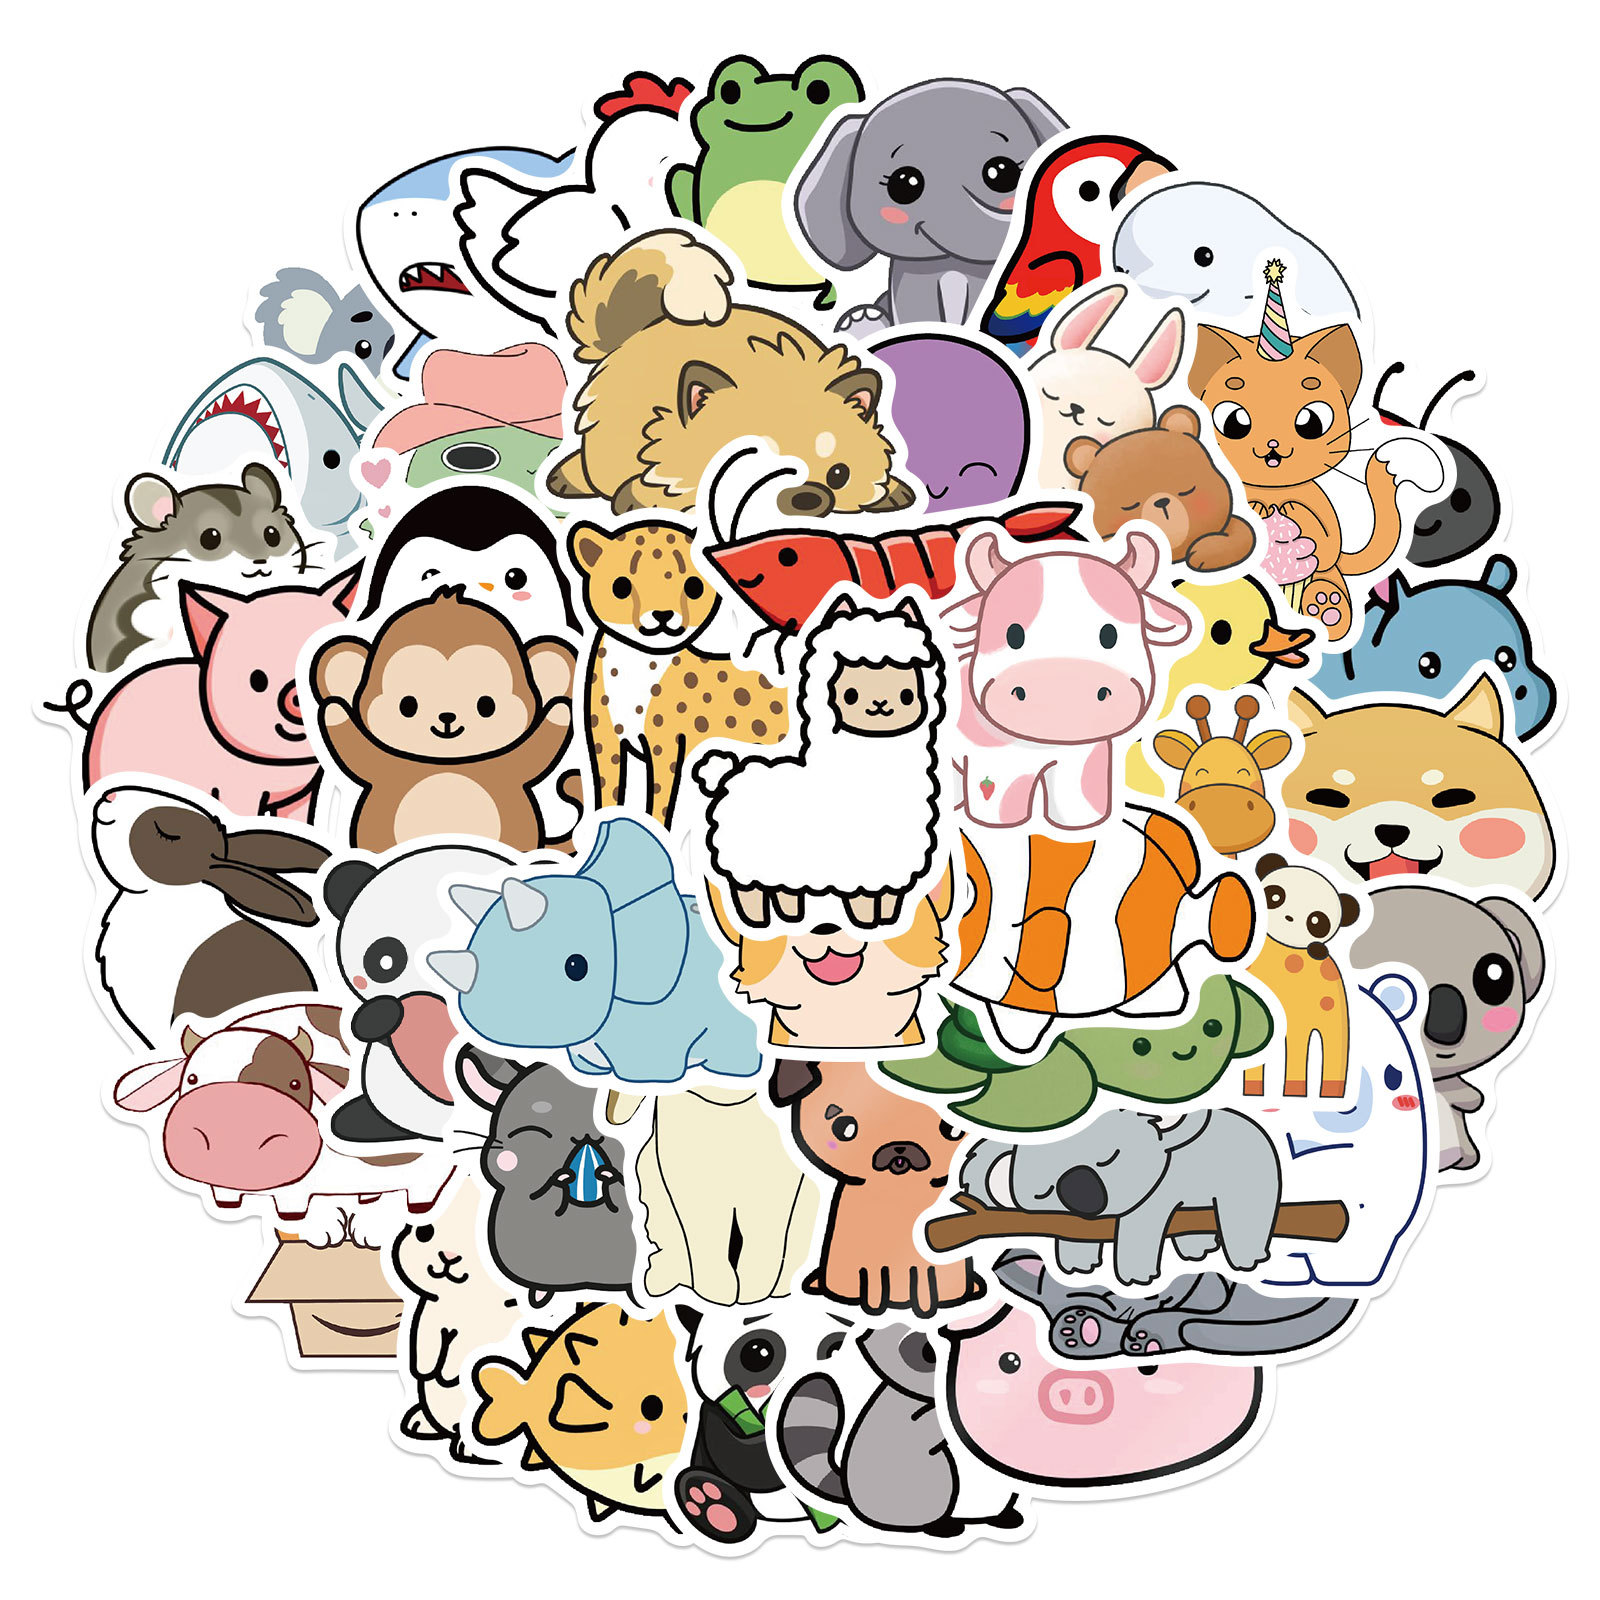 100Pcs Stickers Pack,Nature Time Cute Cartoon Stickers Graffiti DIY  Waterproof Phone Laptop Luggage Skateboard Scrapbook Travel Suitcase for  Kid/Adults Toy Sticker 